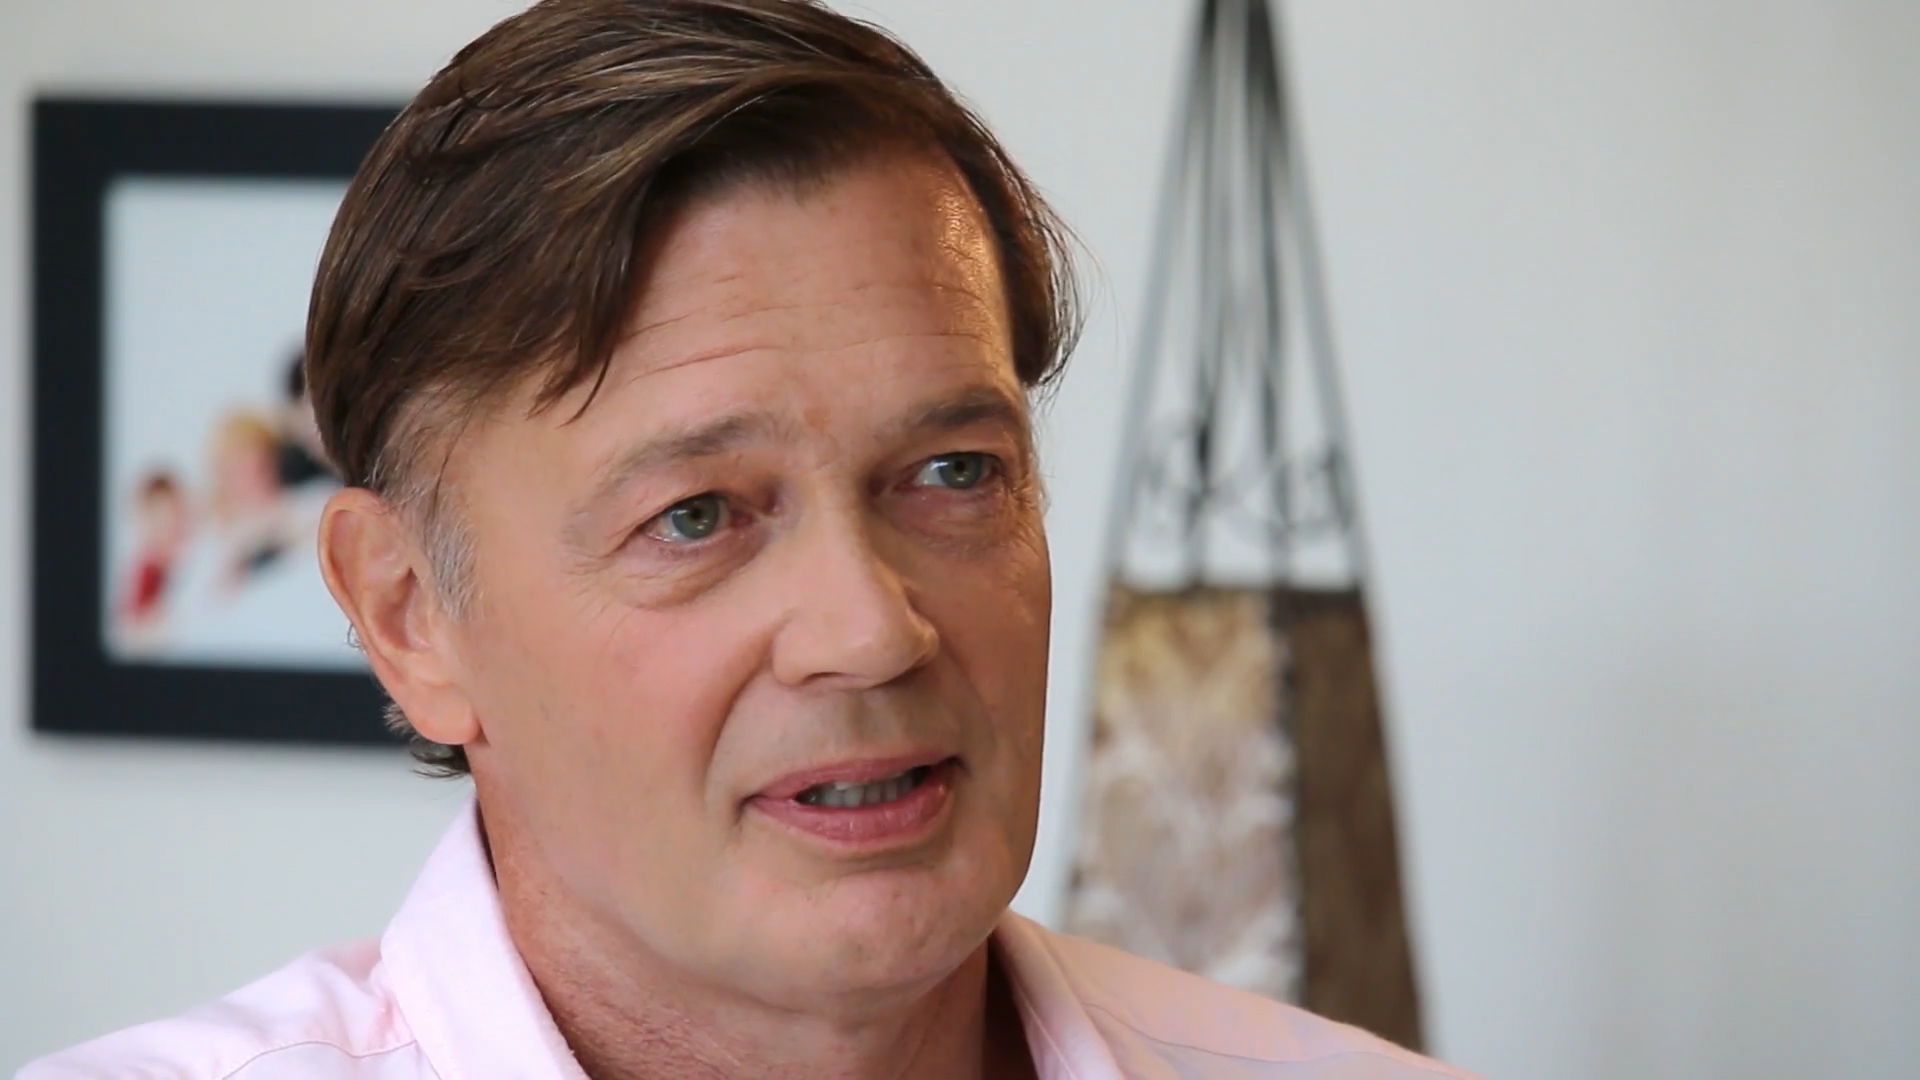 Andrew Wakefield's fraudulent "research" claiming a link between vaccinations and autism for the purposes of selling his own "safe" vaccines.

He single handedly set back not just childhood vaccinations (with a resulting unprecidented spike in measles), but fostered an anti-science sentiment that is still bearing rotten fruit in the current COVID pandemic.

it's rare that you can point your finger to one person and say "YOU are personally responsible for millions of deaths", yet here we are.

-u/McFeely_Smackup